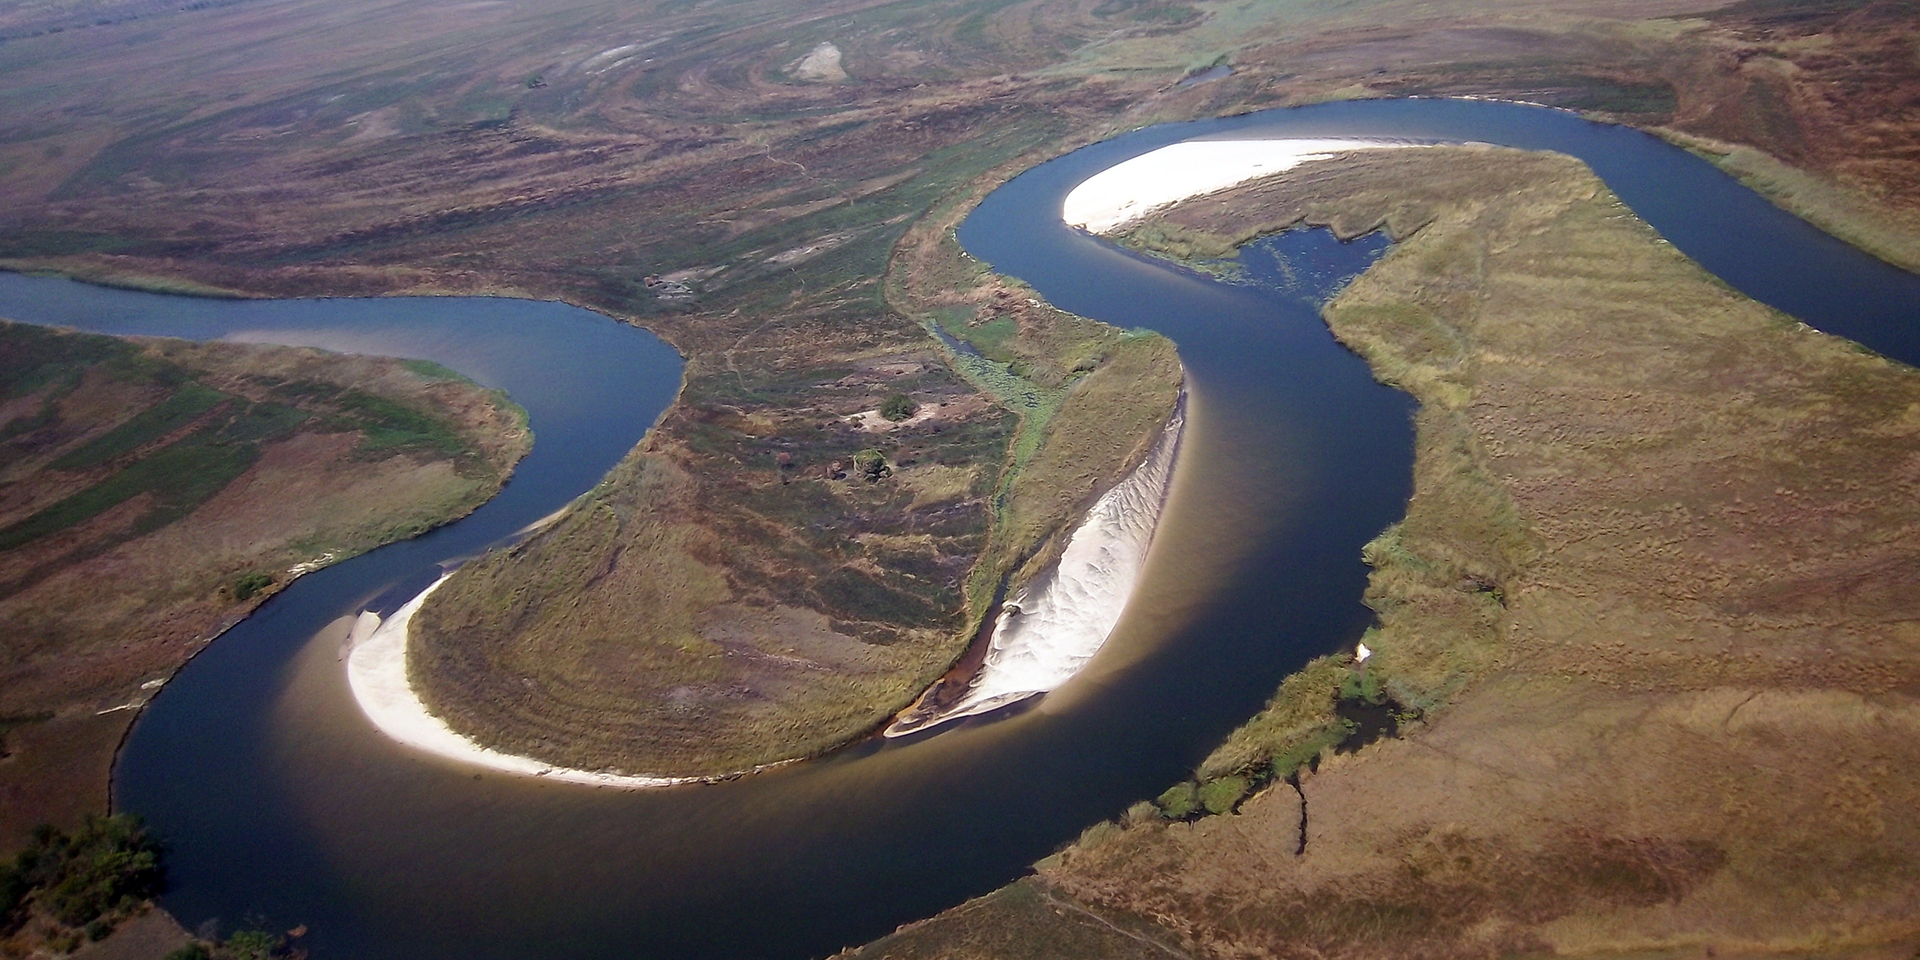 An aerial view of a large river snaking through a green landscape.